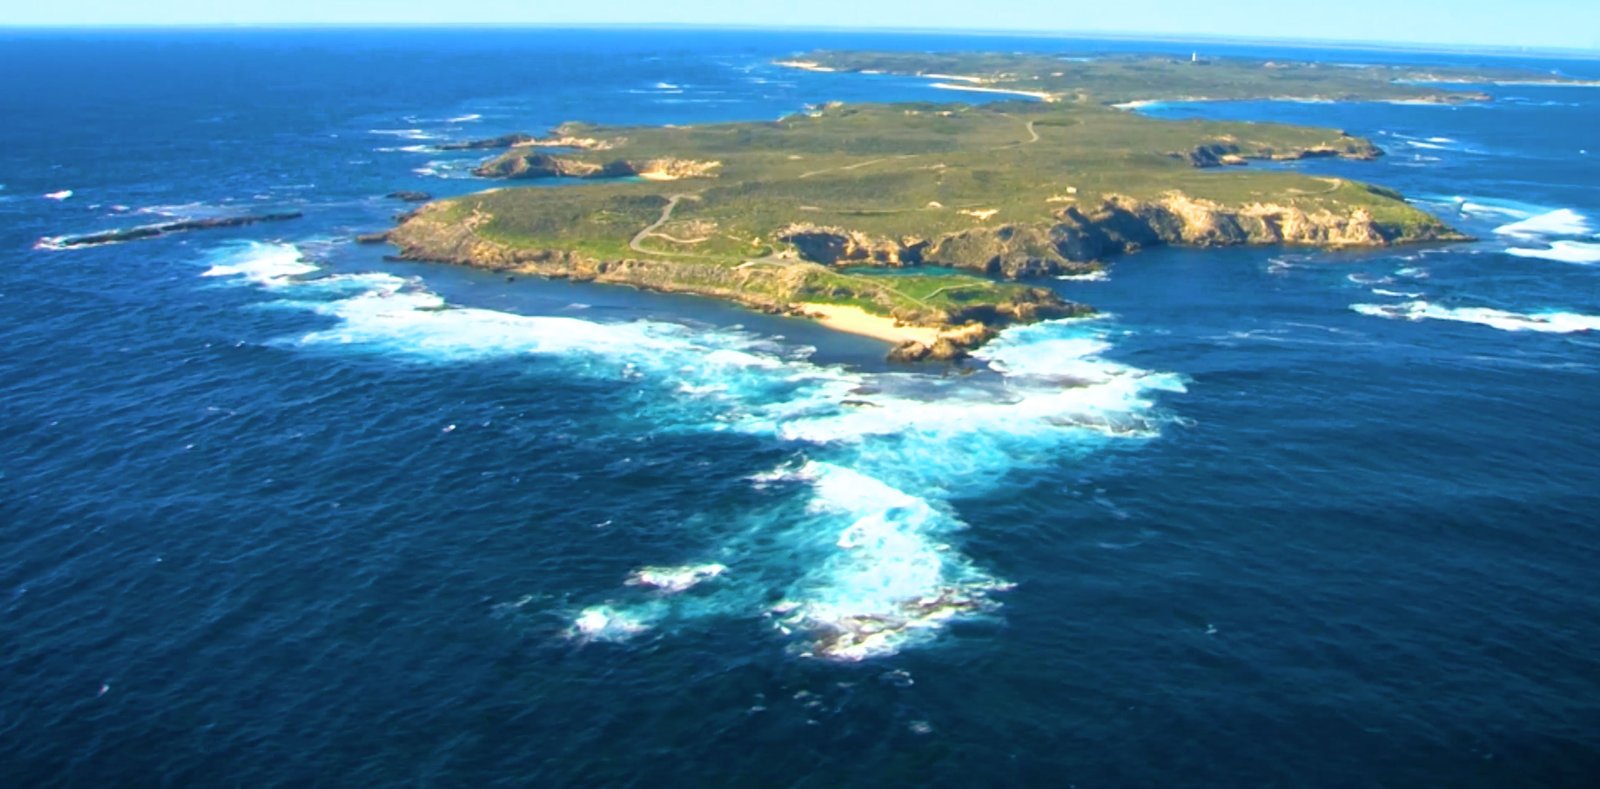 West End of Rottnest Island